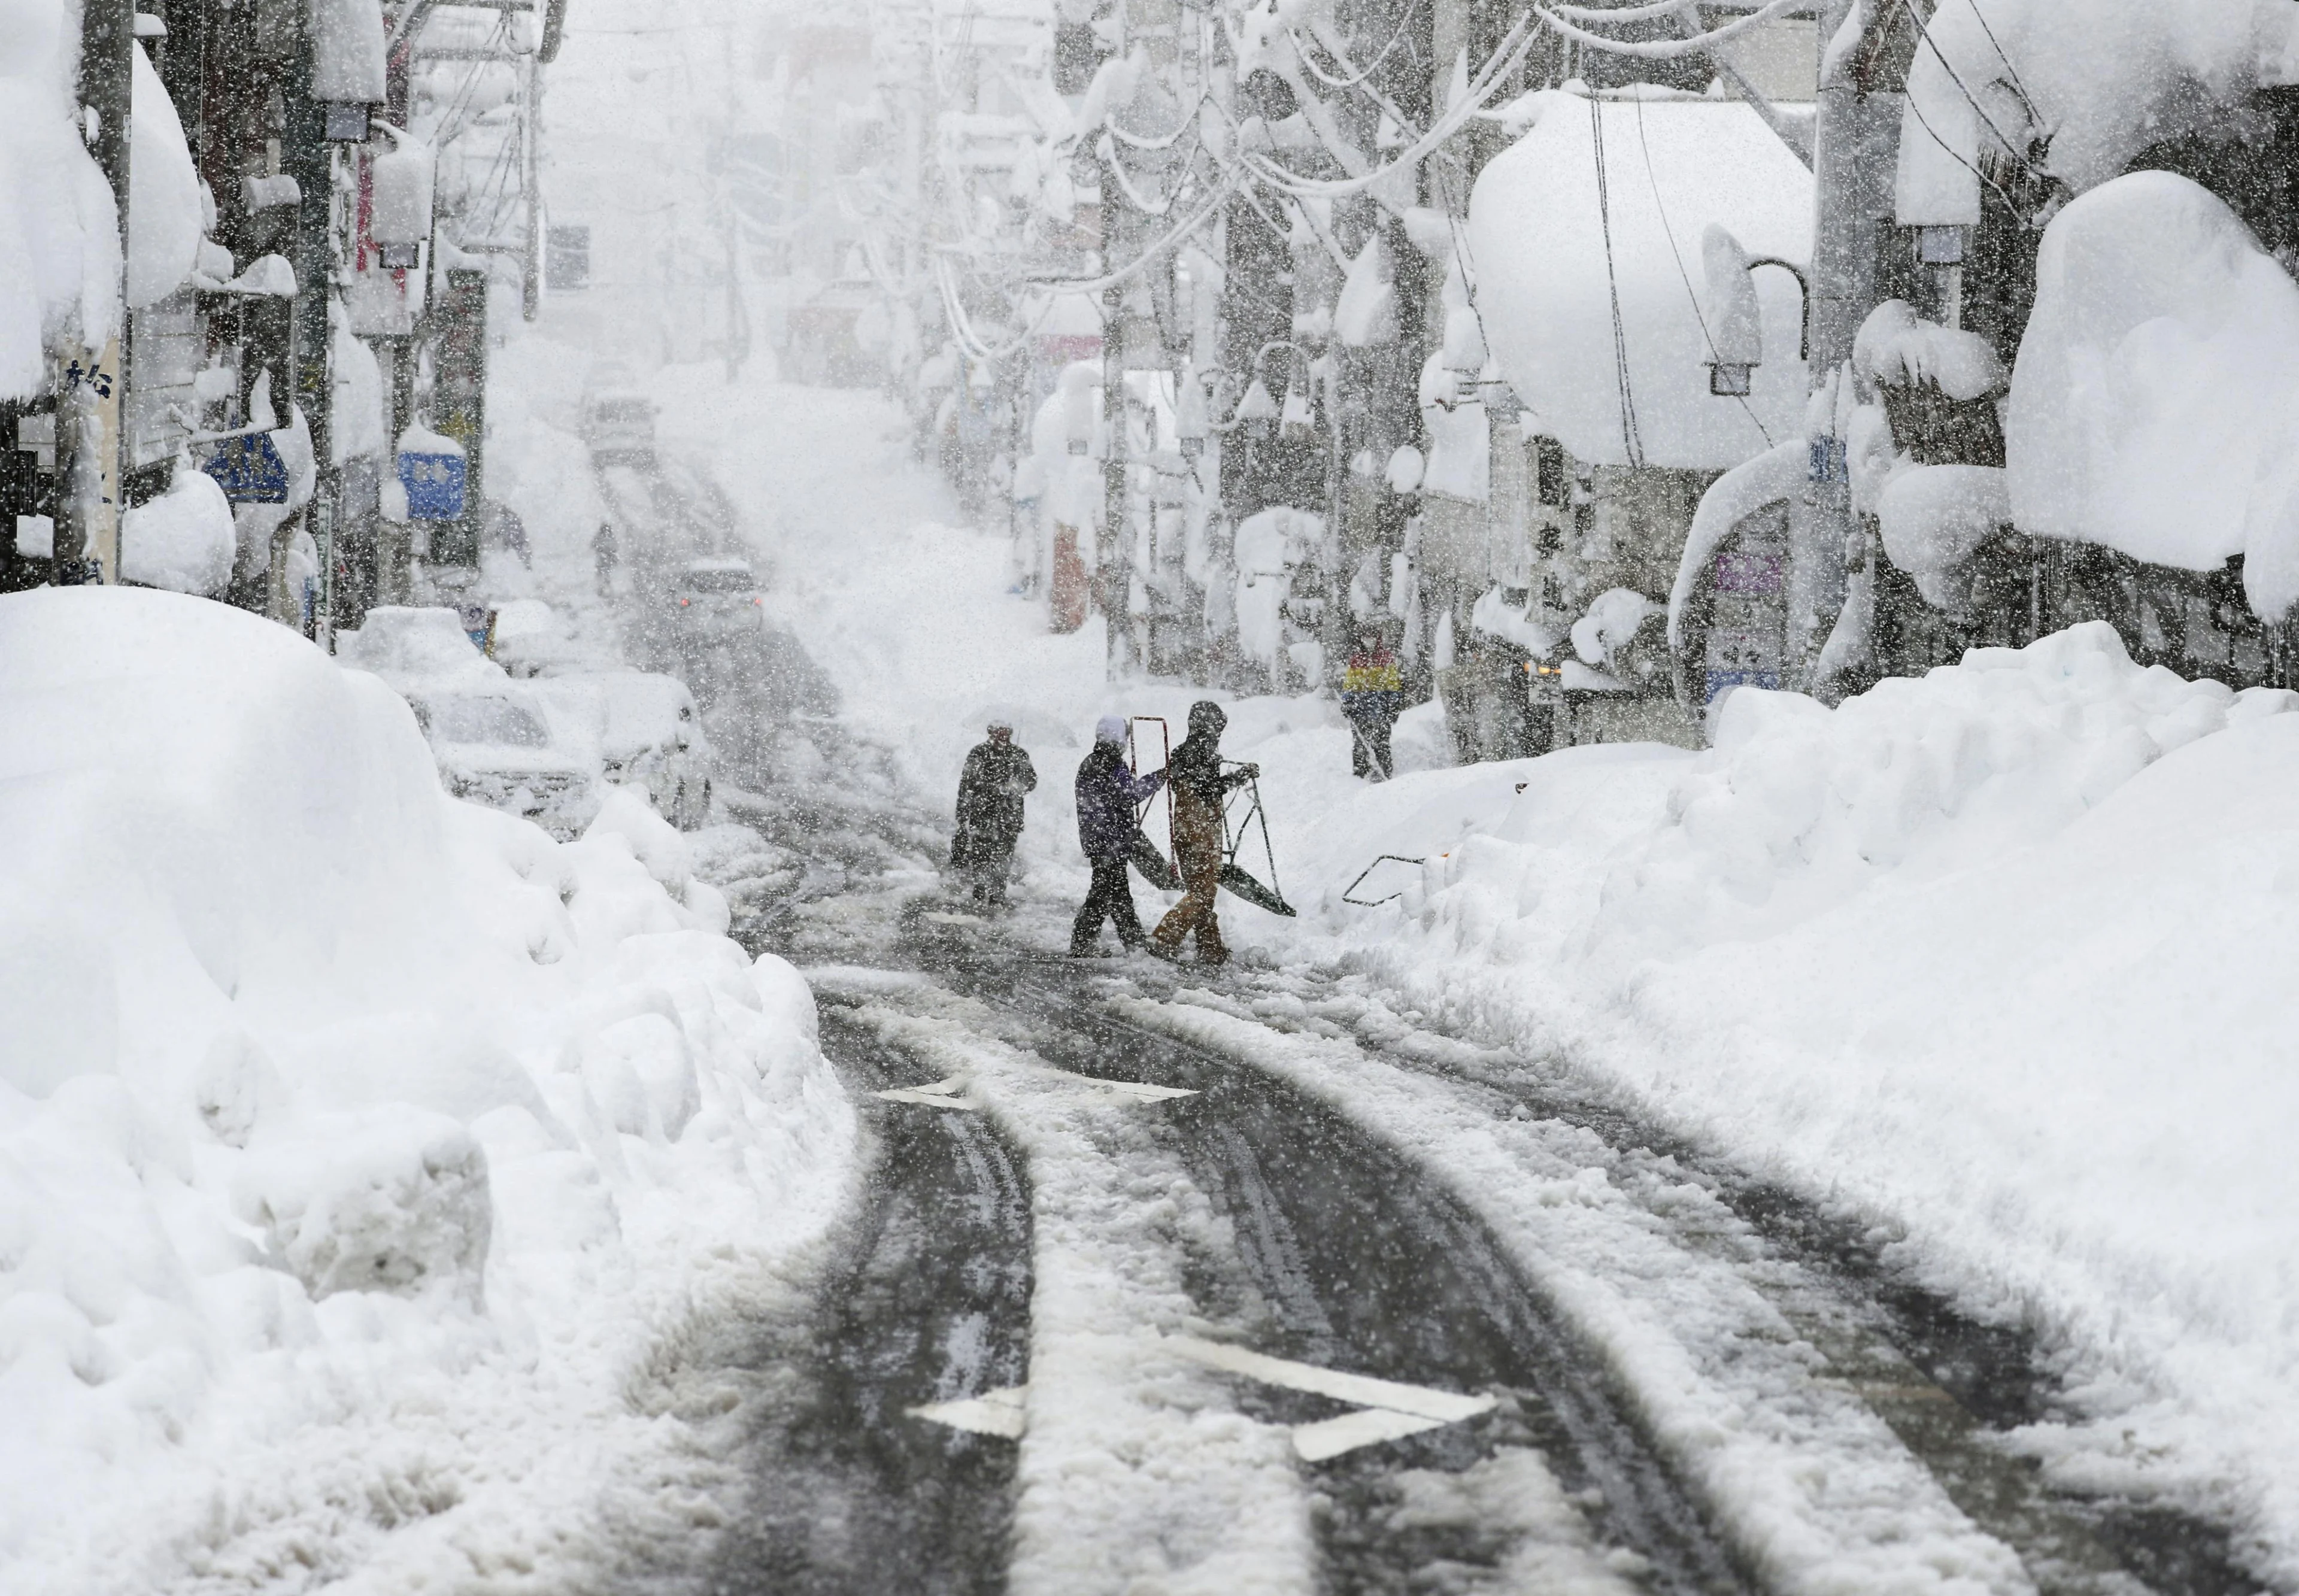 People remove snow on a street in Yuzawa, Niigata Prefecture, Japan in this photo taken by Kyodo December 17, 2020. Mandatory credit Kyodo/via REUTERS